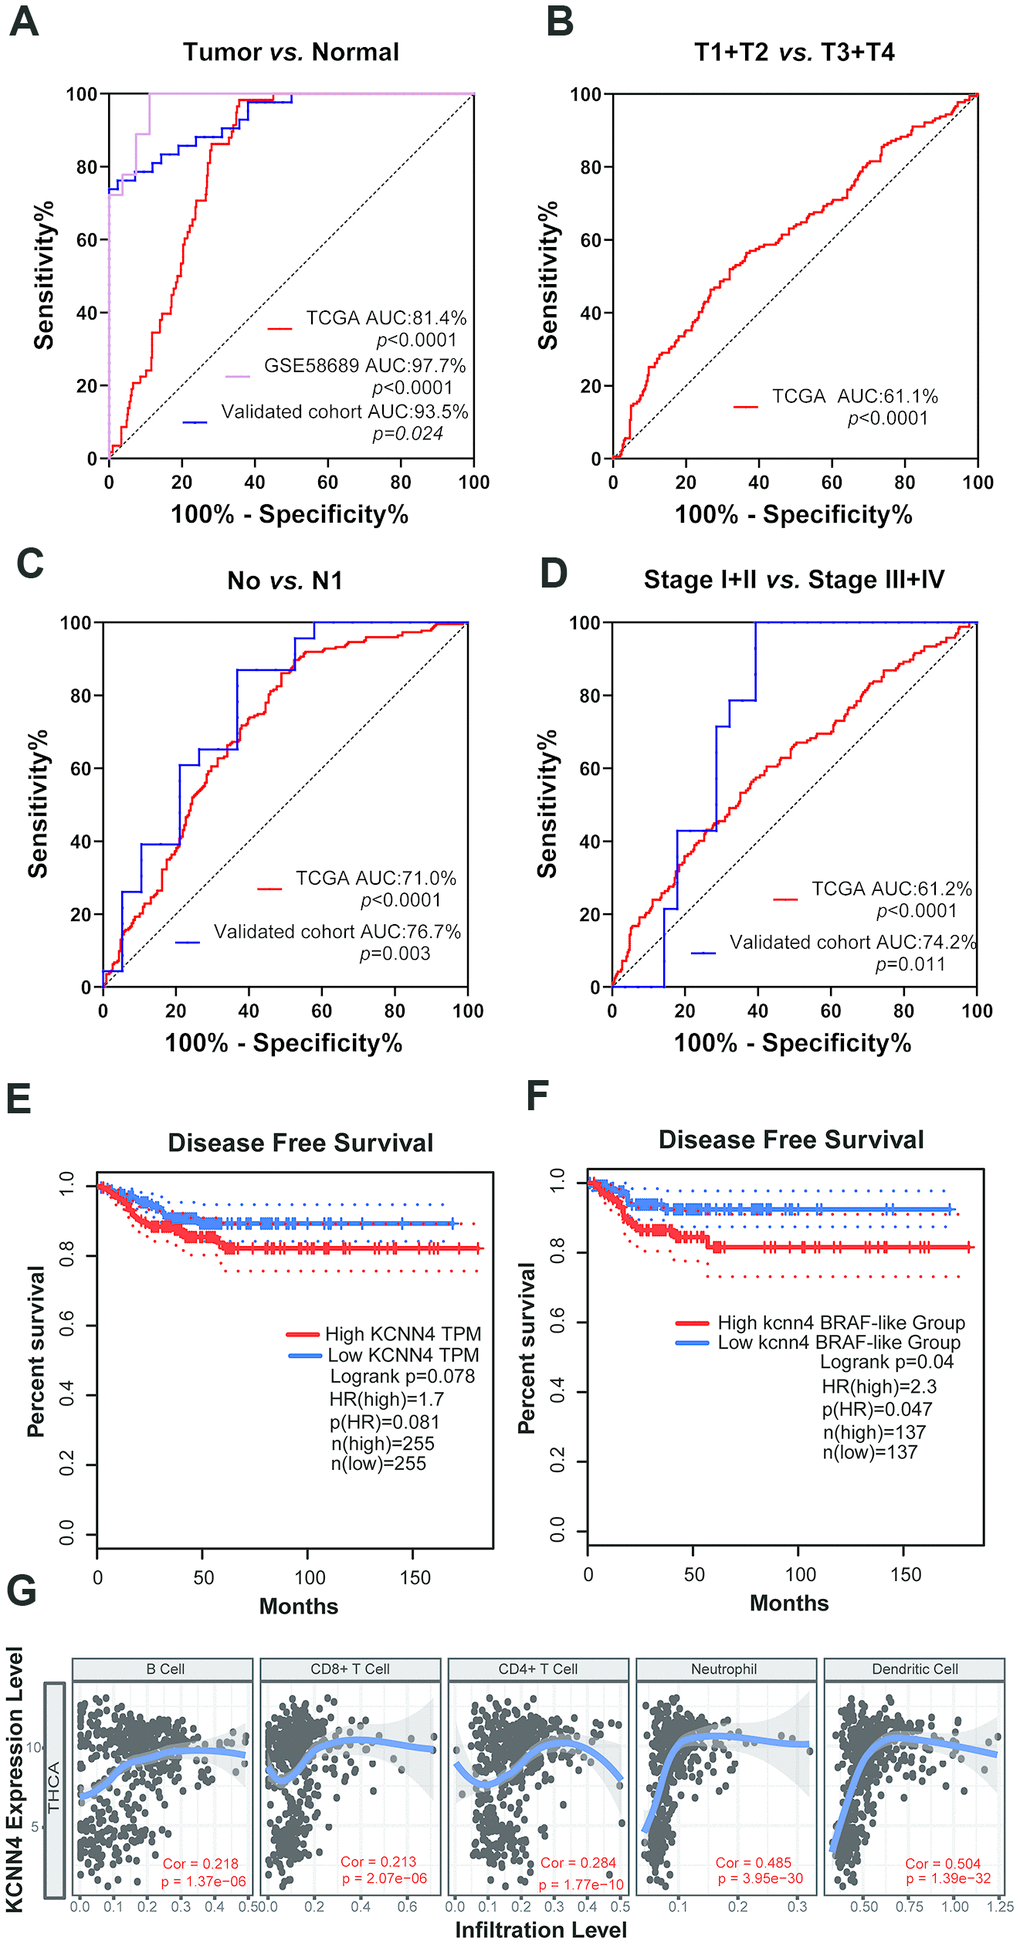 The upregulation of KCNN4 served as a prognostic and diagnostic biomarker in PTC. (A) ROC curve analysis demonstrated that KCNN4 could distinguish PTC from nontumorous tissues in TCGA, GSE58689 and our validated cohort. (B) Diagnostic value of KCNN4 expression for the T stage in TCGA. (C, D) ROC curve analysis depicting KCNN4 expression against the N stage and tumor stage in TCGA and our validated cohort. (E, F) Kaplan-Meier analyses of disease-free survival based on low and high KCNN4 expression in PTC patients and the BRAF-like group from TCGA. (G) KCNN4 expression was associated with immune infiltration in TCGA. THCA: Thyroid carcinoma; Cor: Correlation.